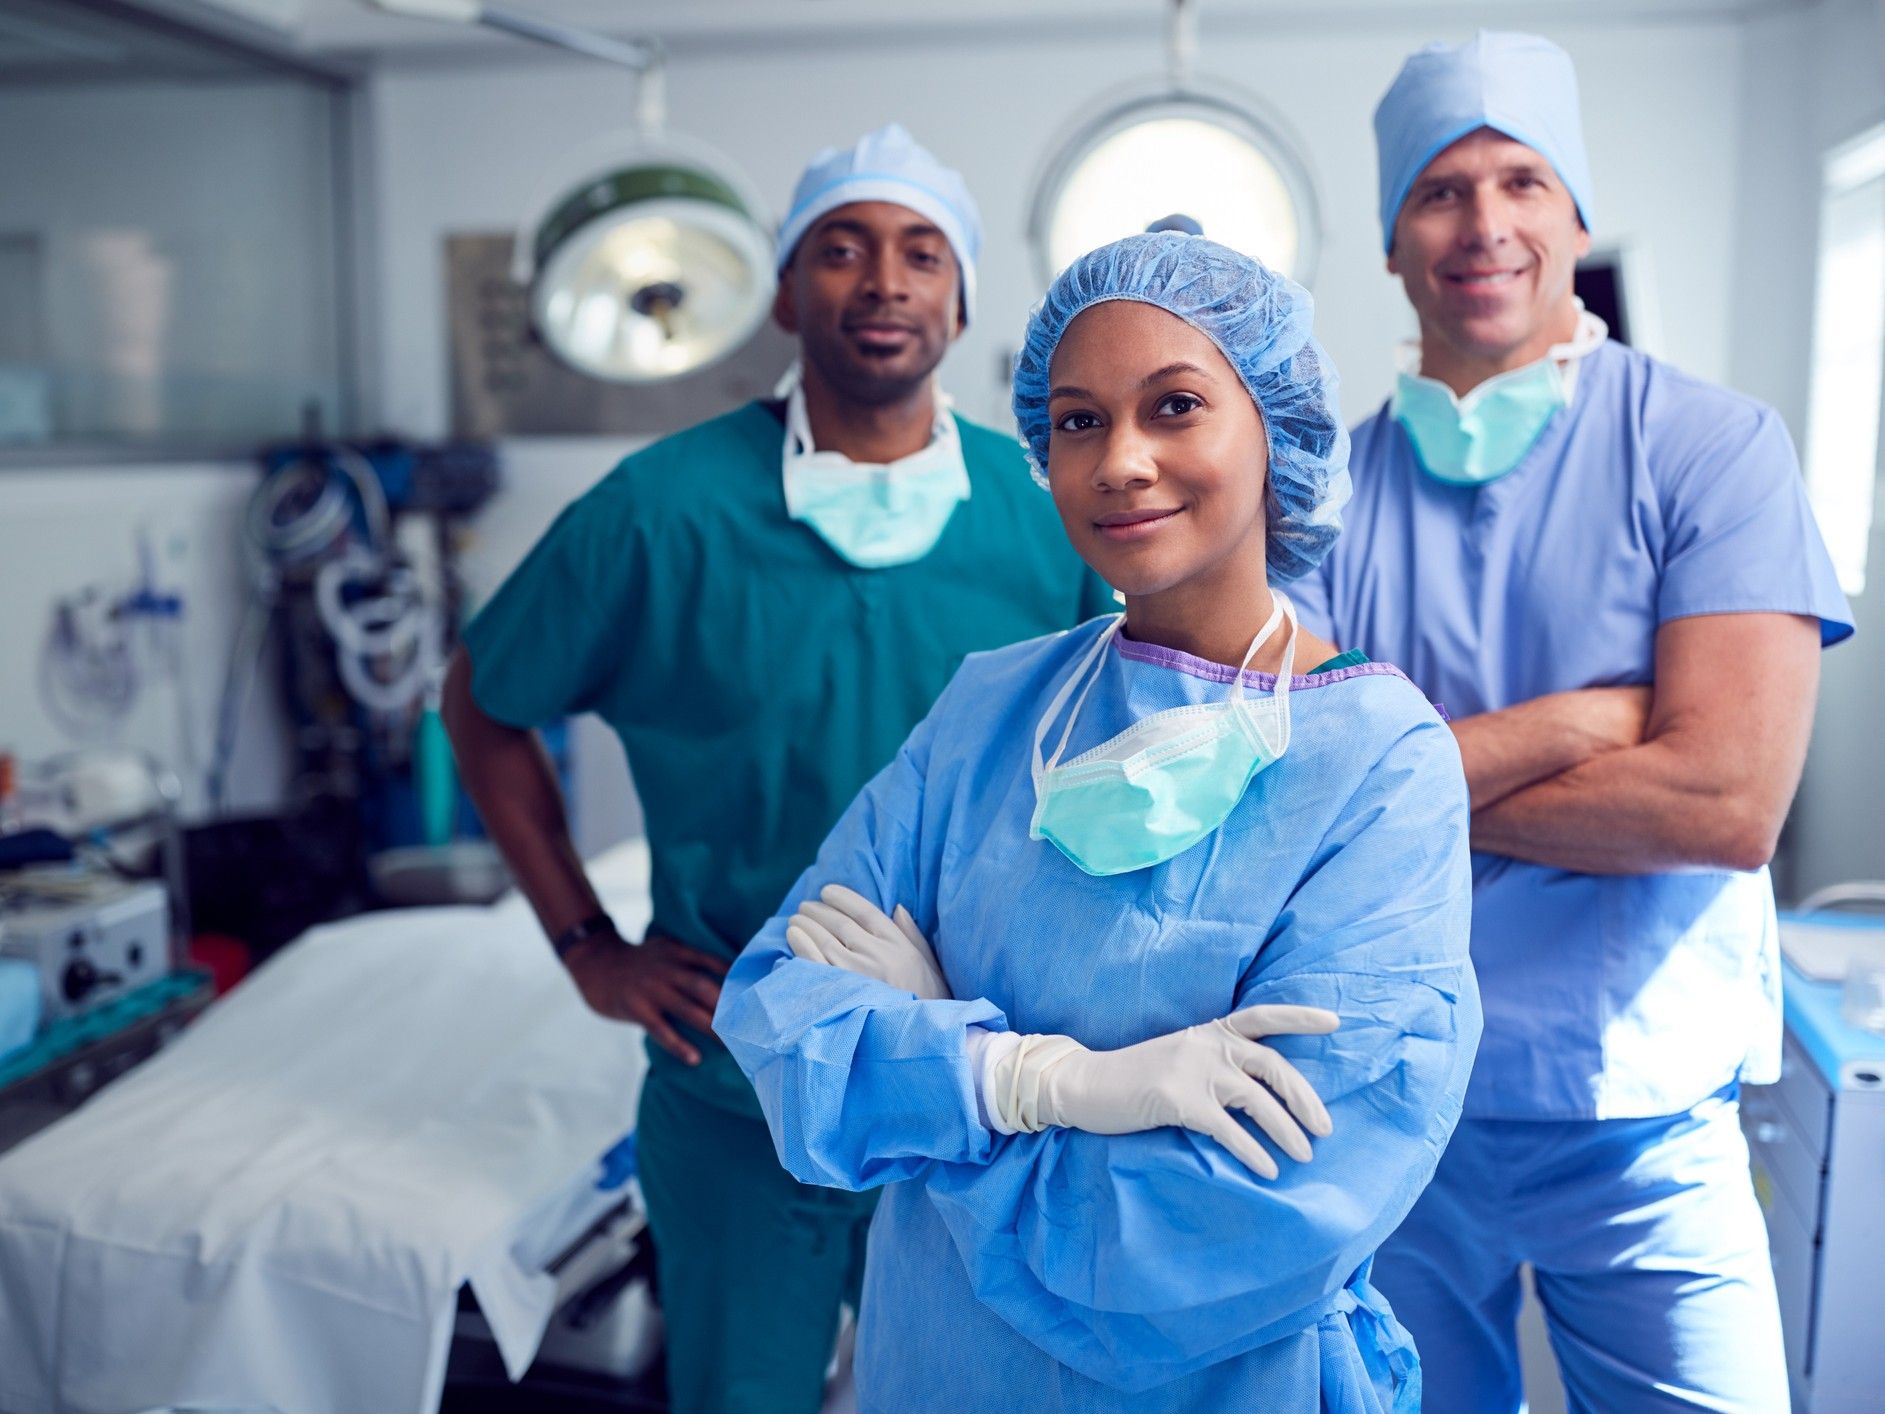 Internationally trained health professionals are already a core part of Canada's medical community. (Getty)